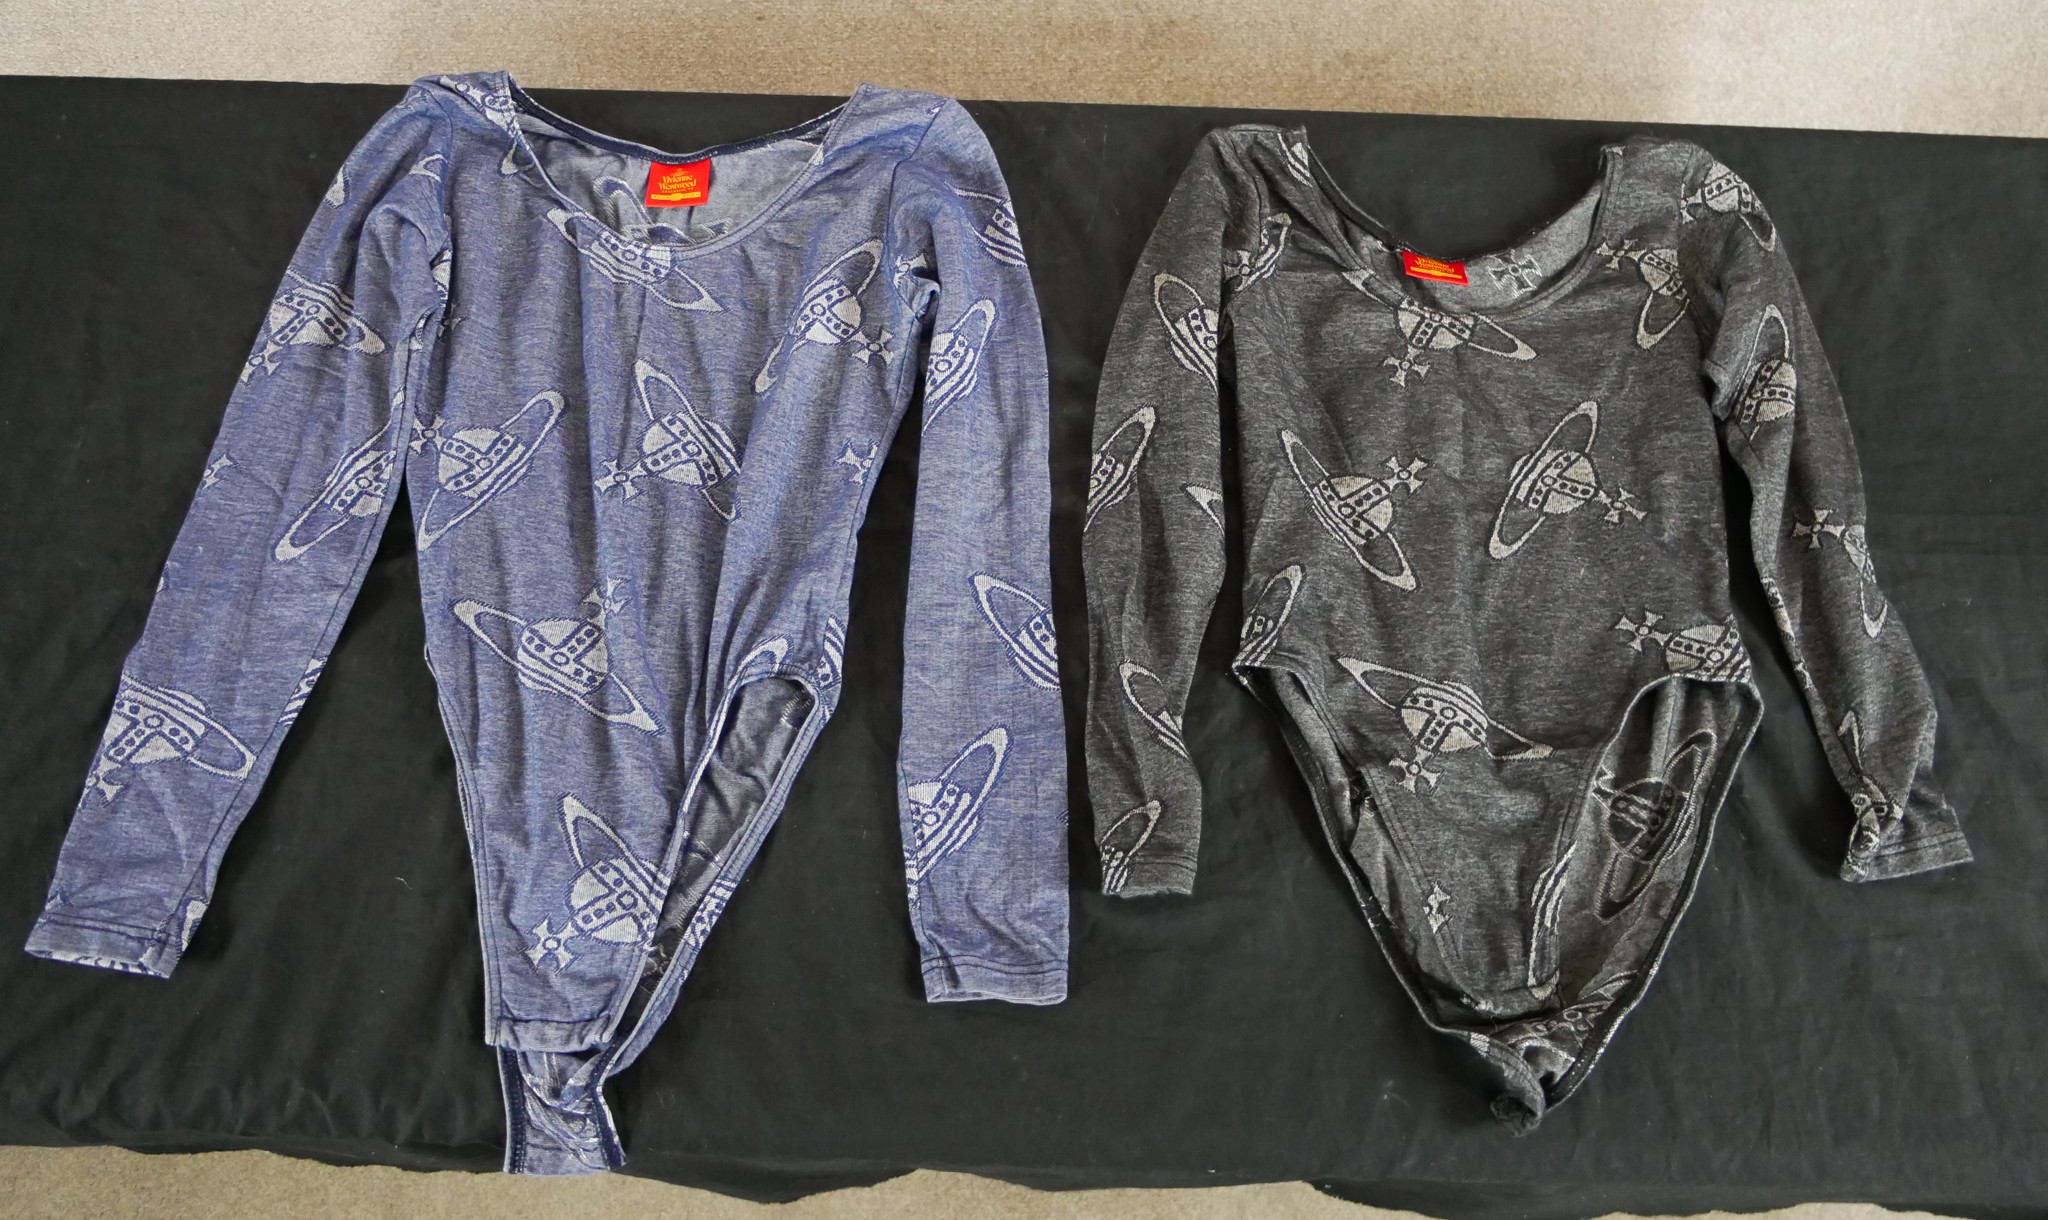 Two 20th century ladies Vivenne Westwood leotards, each decorated with the Vivenne Westwood motif.